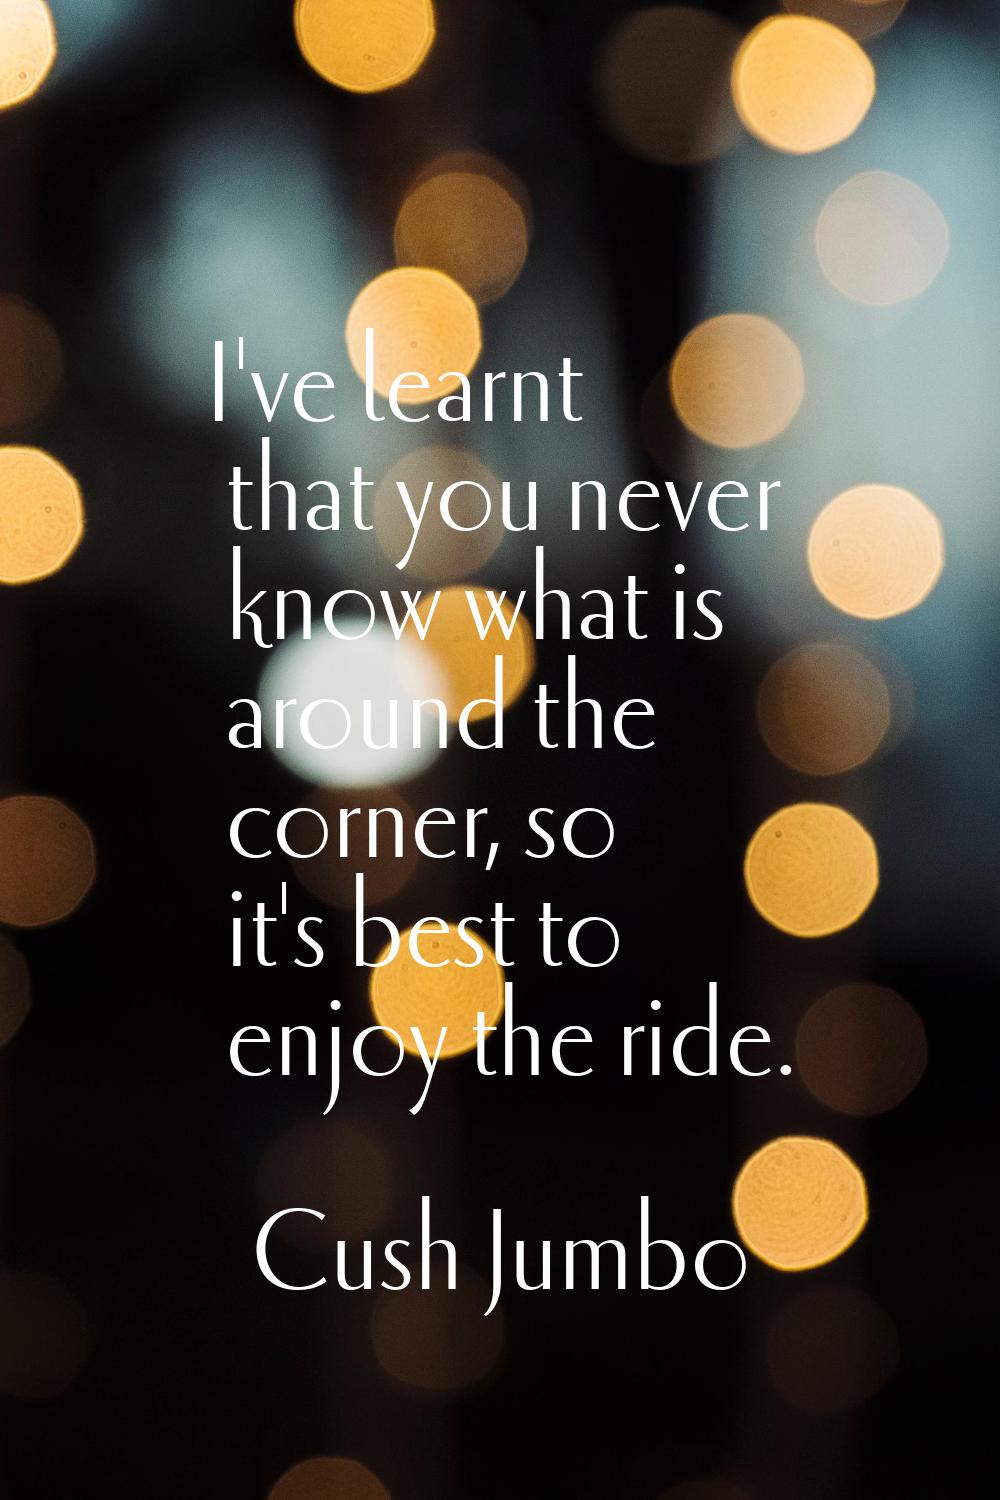 I've learnt that you never know what is around the corner, so it's best to enjoy the ride.